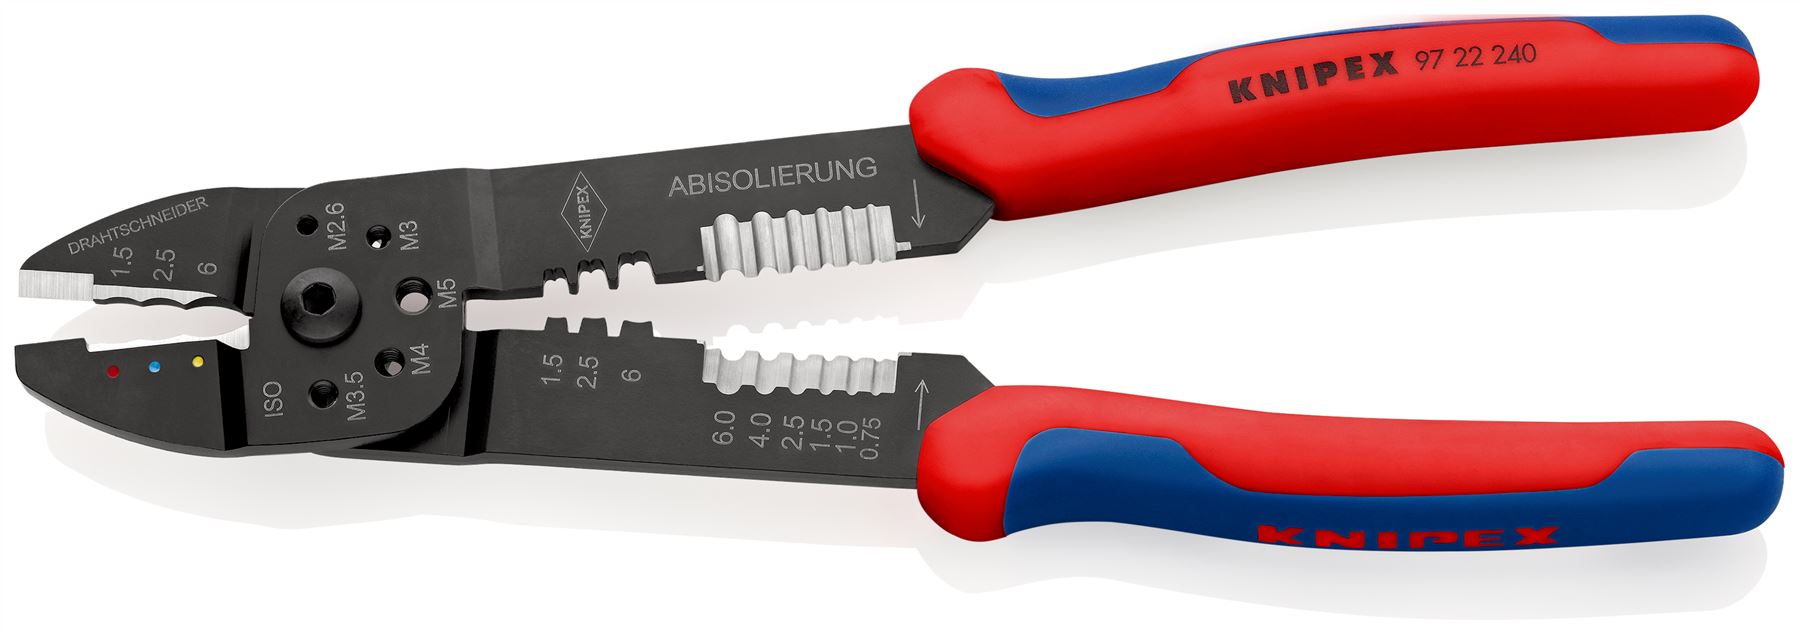 Knipex Crimping Pliers with Multi Component Grips 0.5-6.0mm 97 22 240